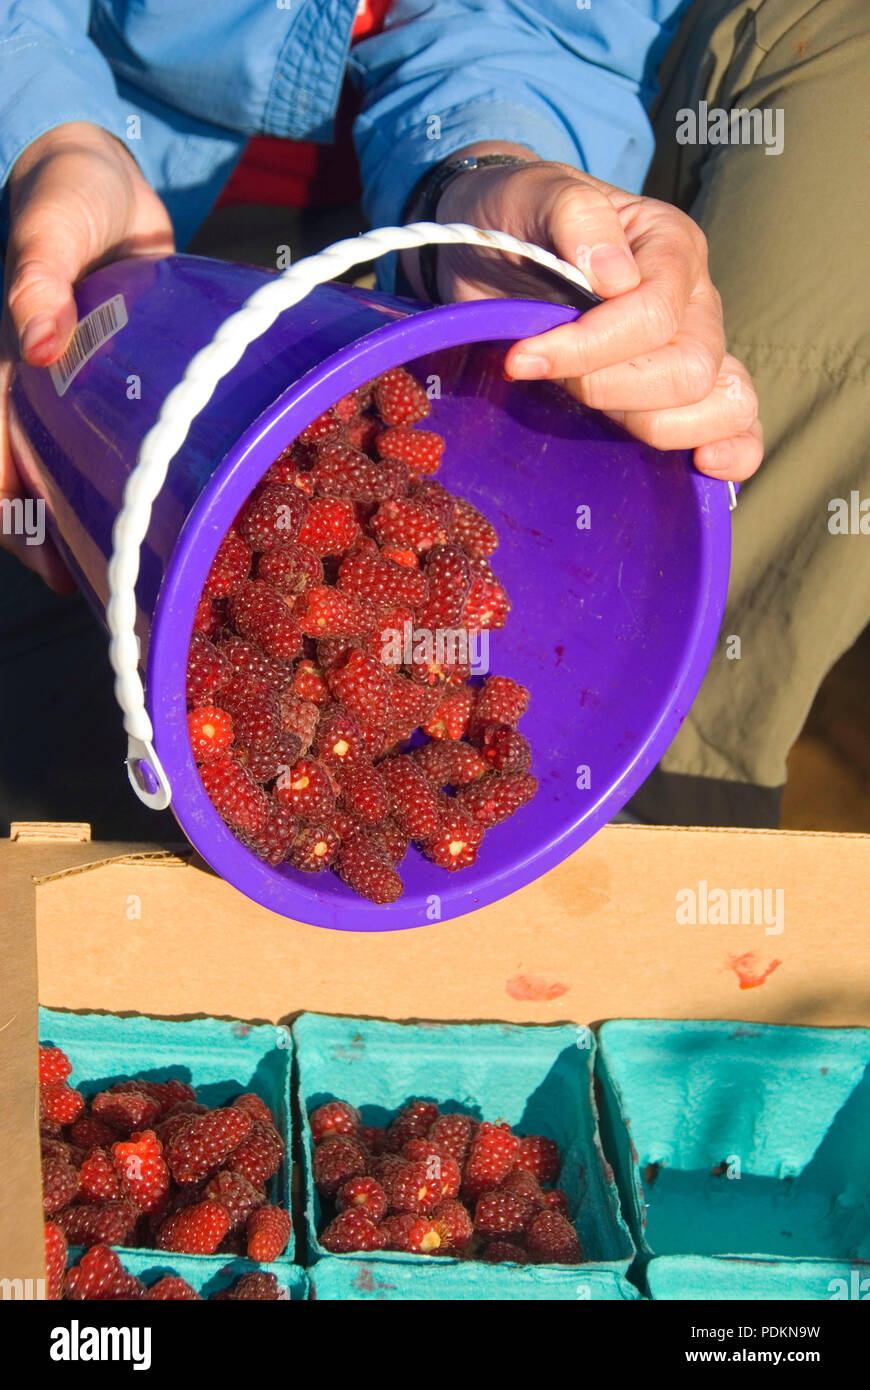 Putting tayberries (mix between raspberry and blackberry) in produce flat, Marion County, Oregon Stock Photo